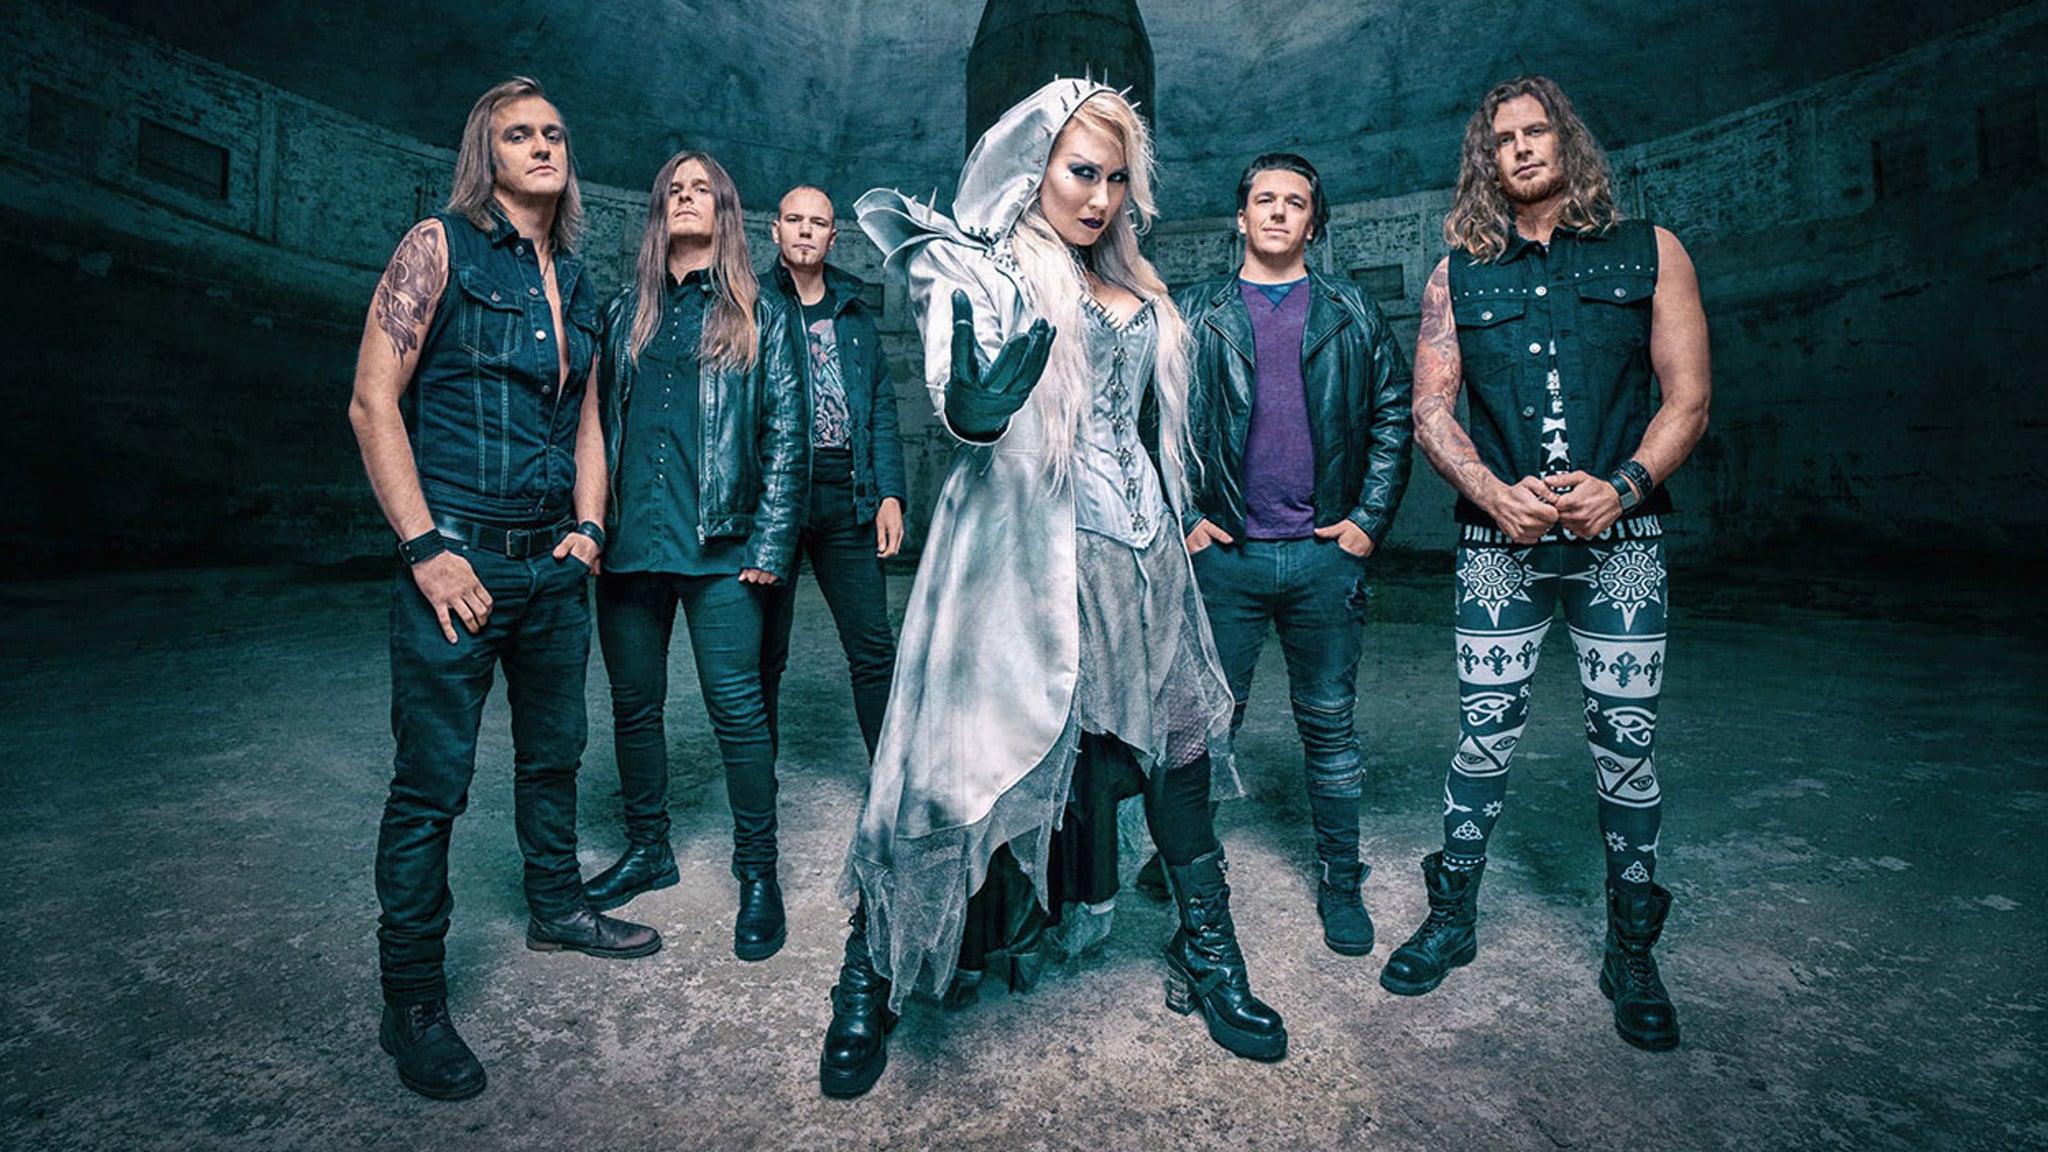 Battle Beast presale code for show tickets in Charlotte, NC (The Underground)